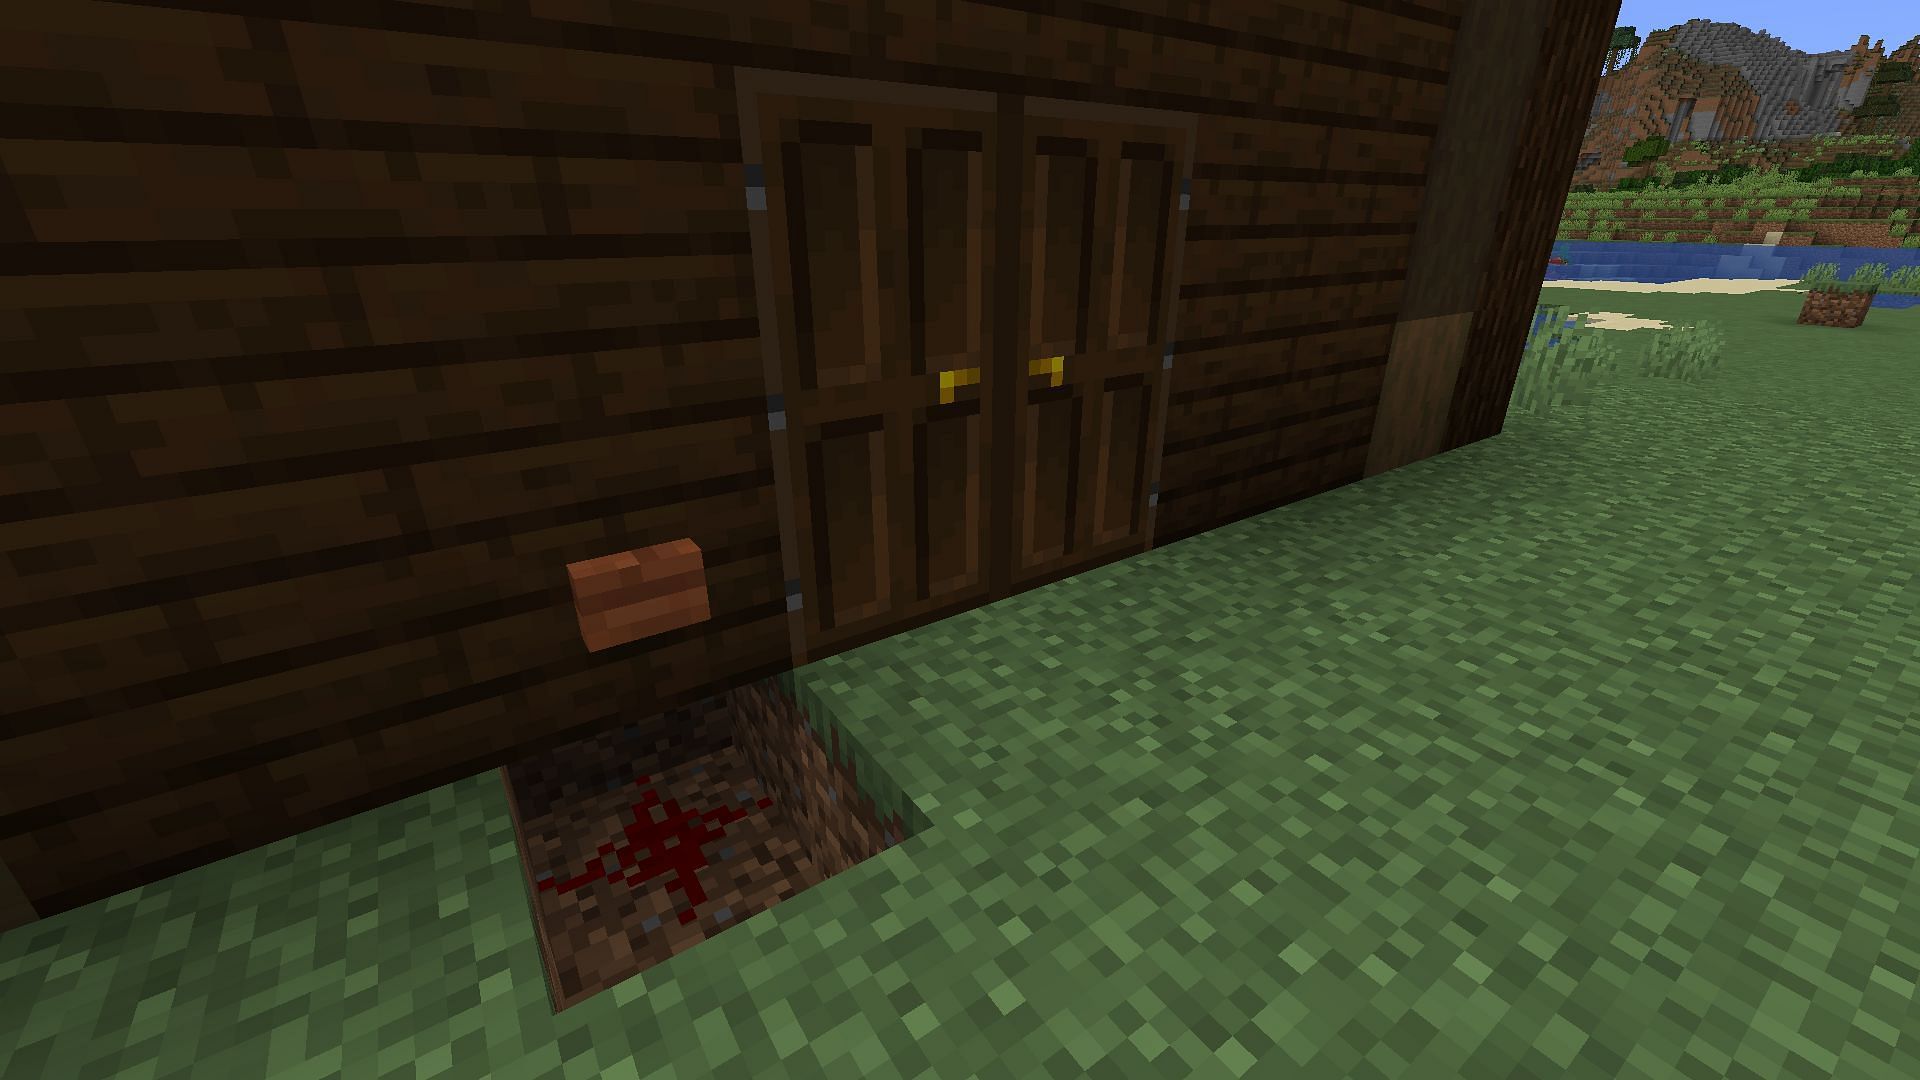 Wiring a simple button is the first step in making a doorbell in Minecraft (Image via Mojang)